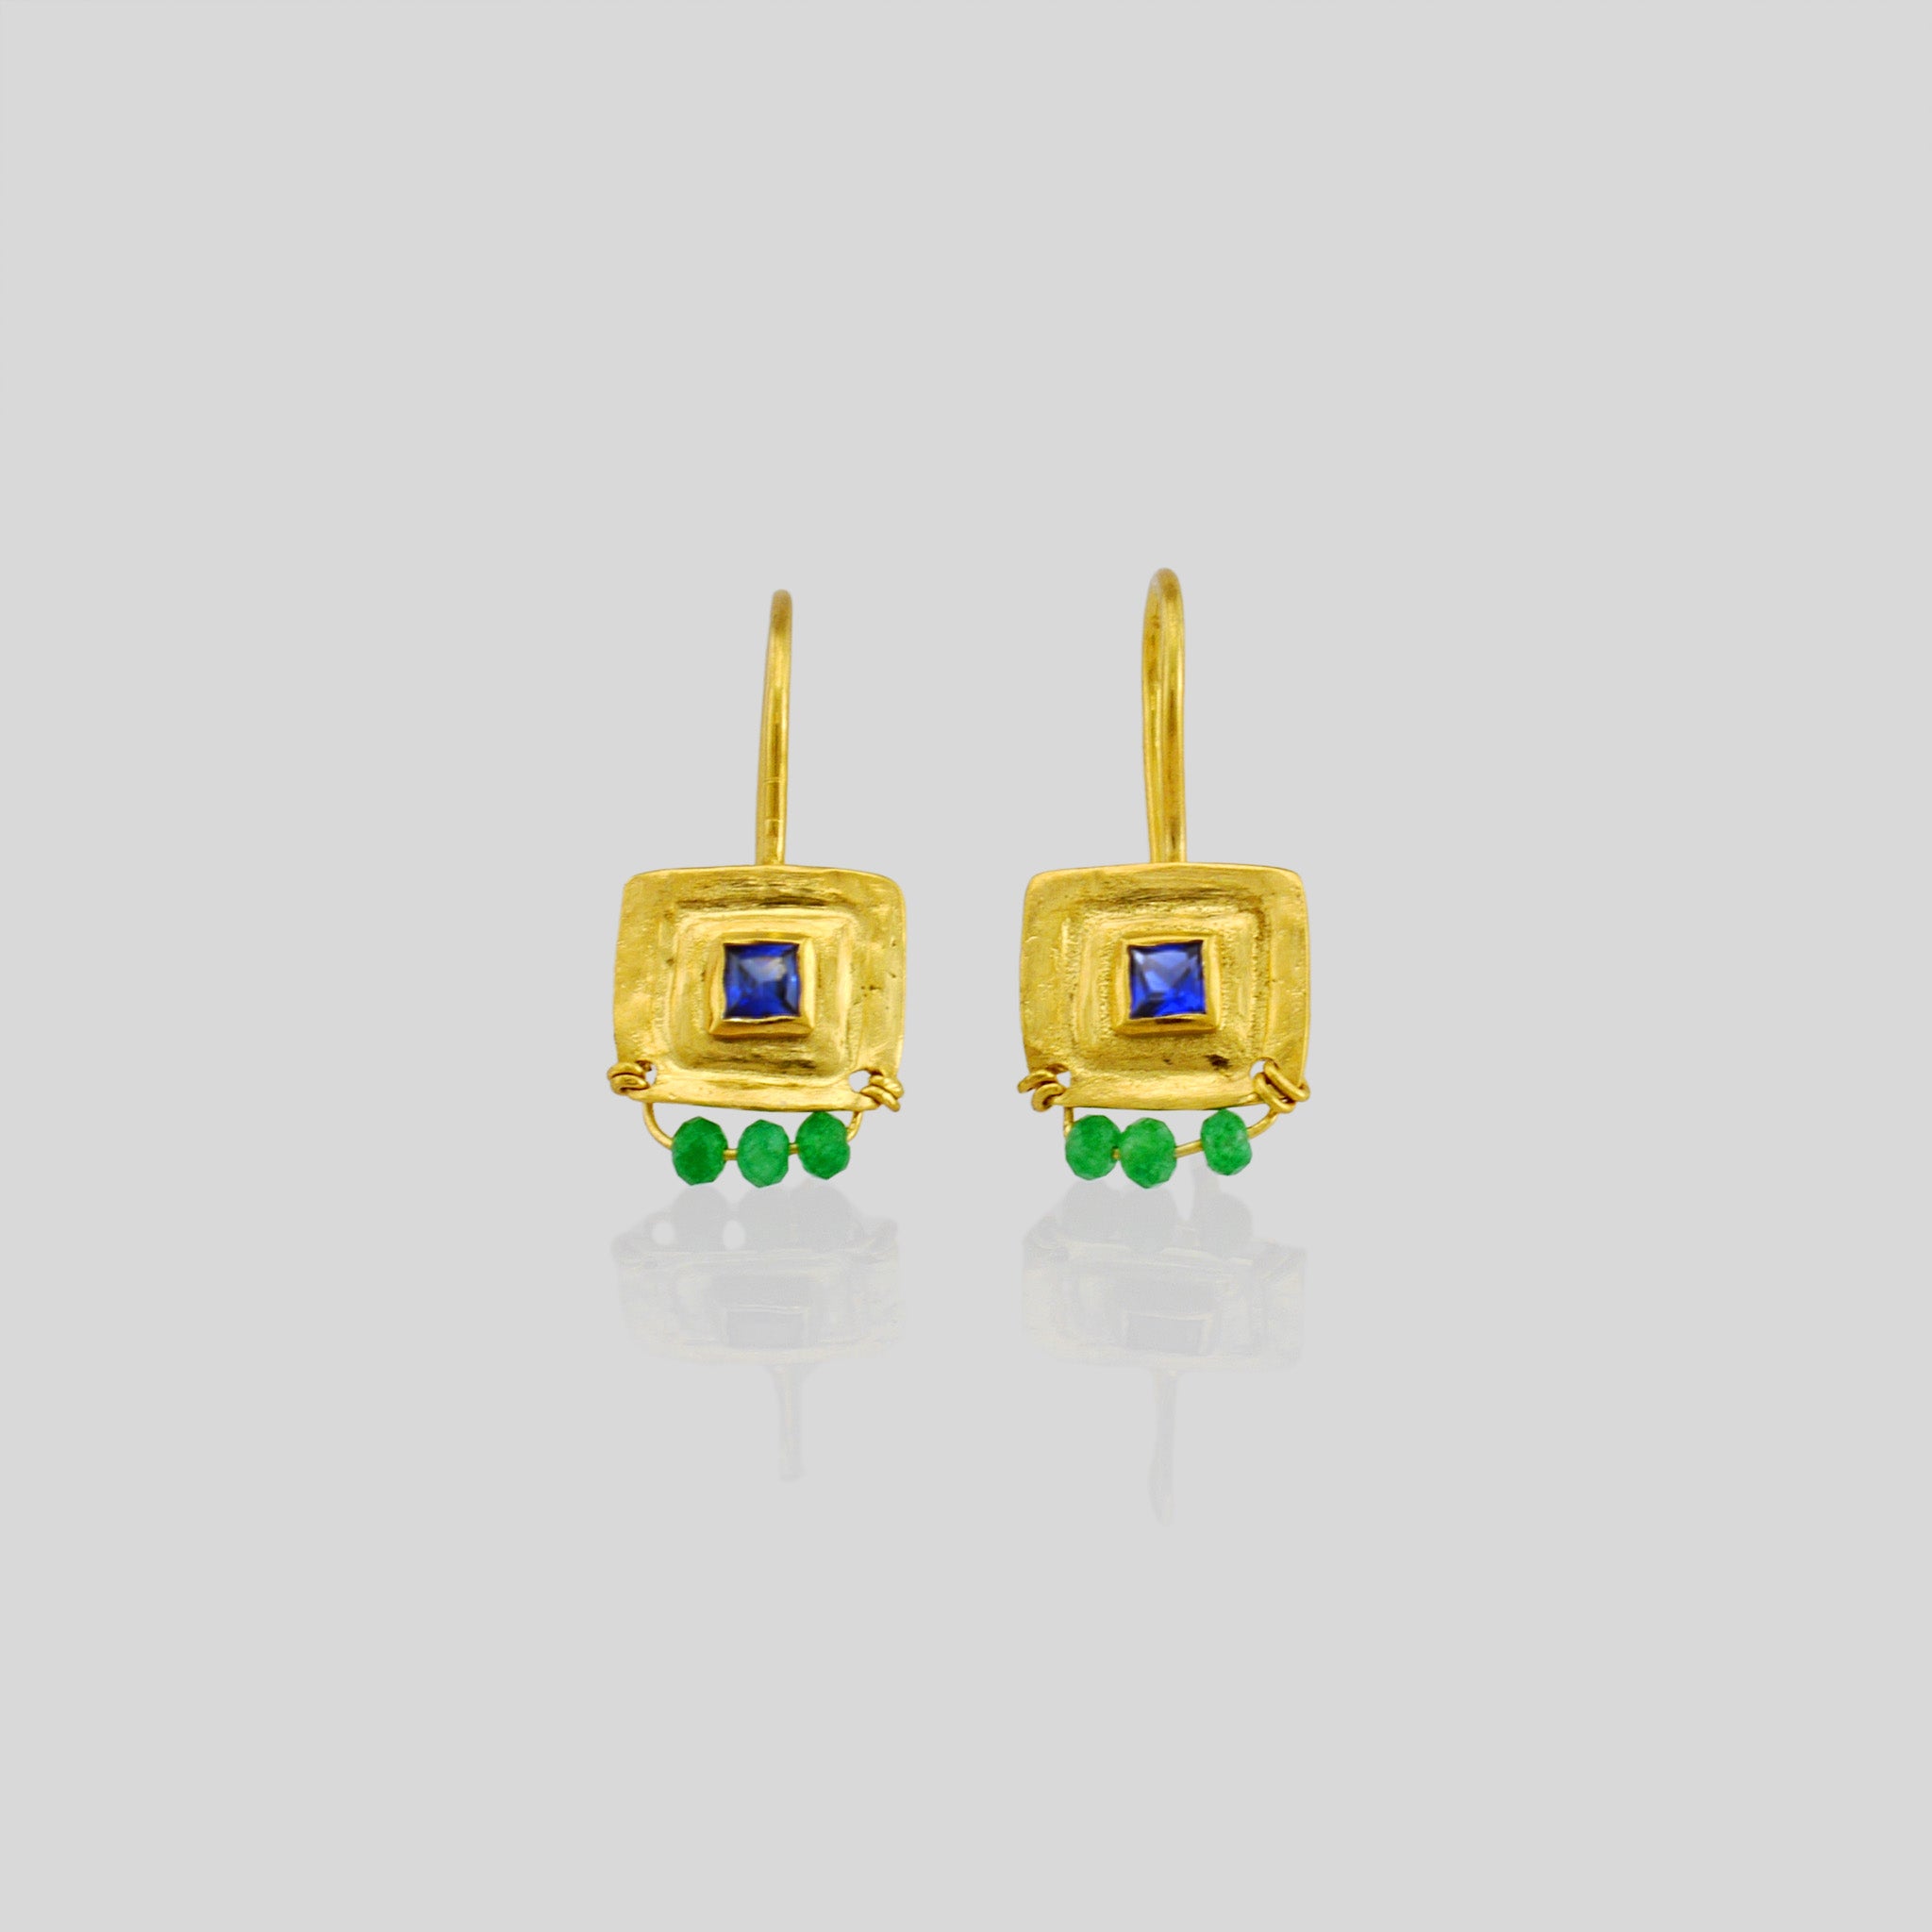 Pharaohs I - Gold Square drop earrings with Sapphire & Emerald